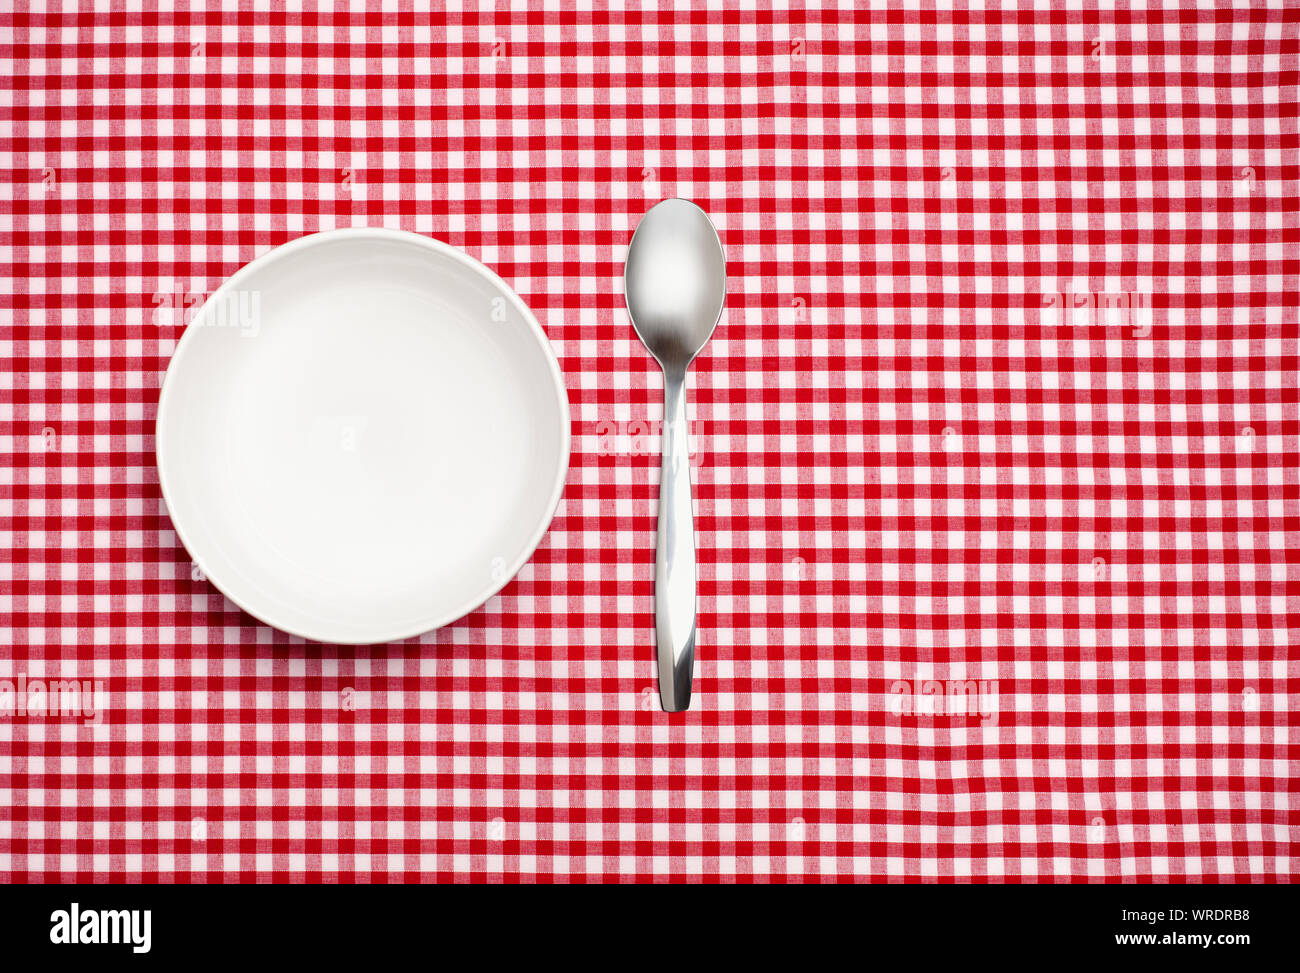 Empty white bowl and spoon on a red gingham tablecloth Stock Photo